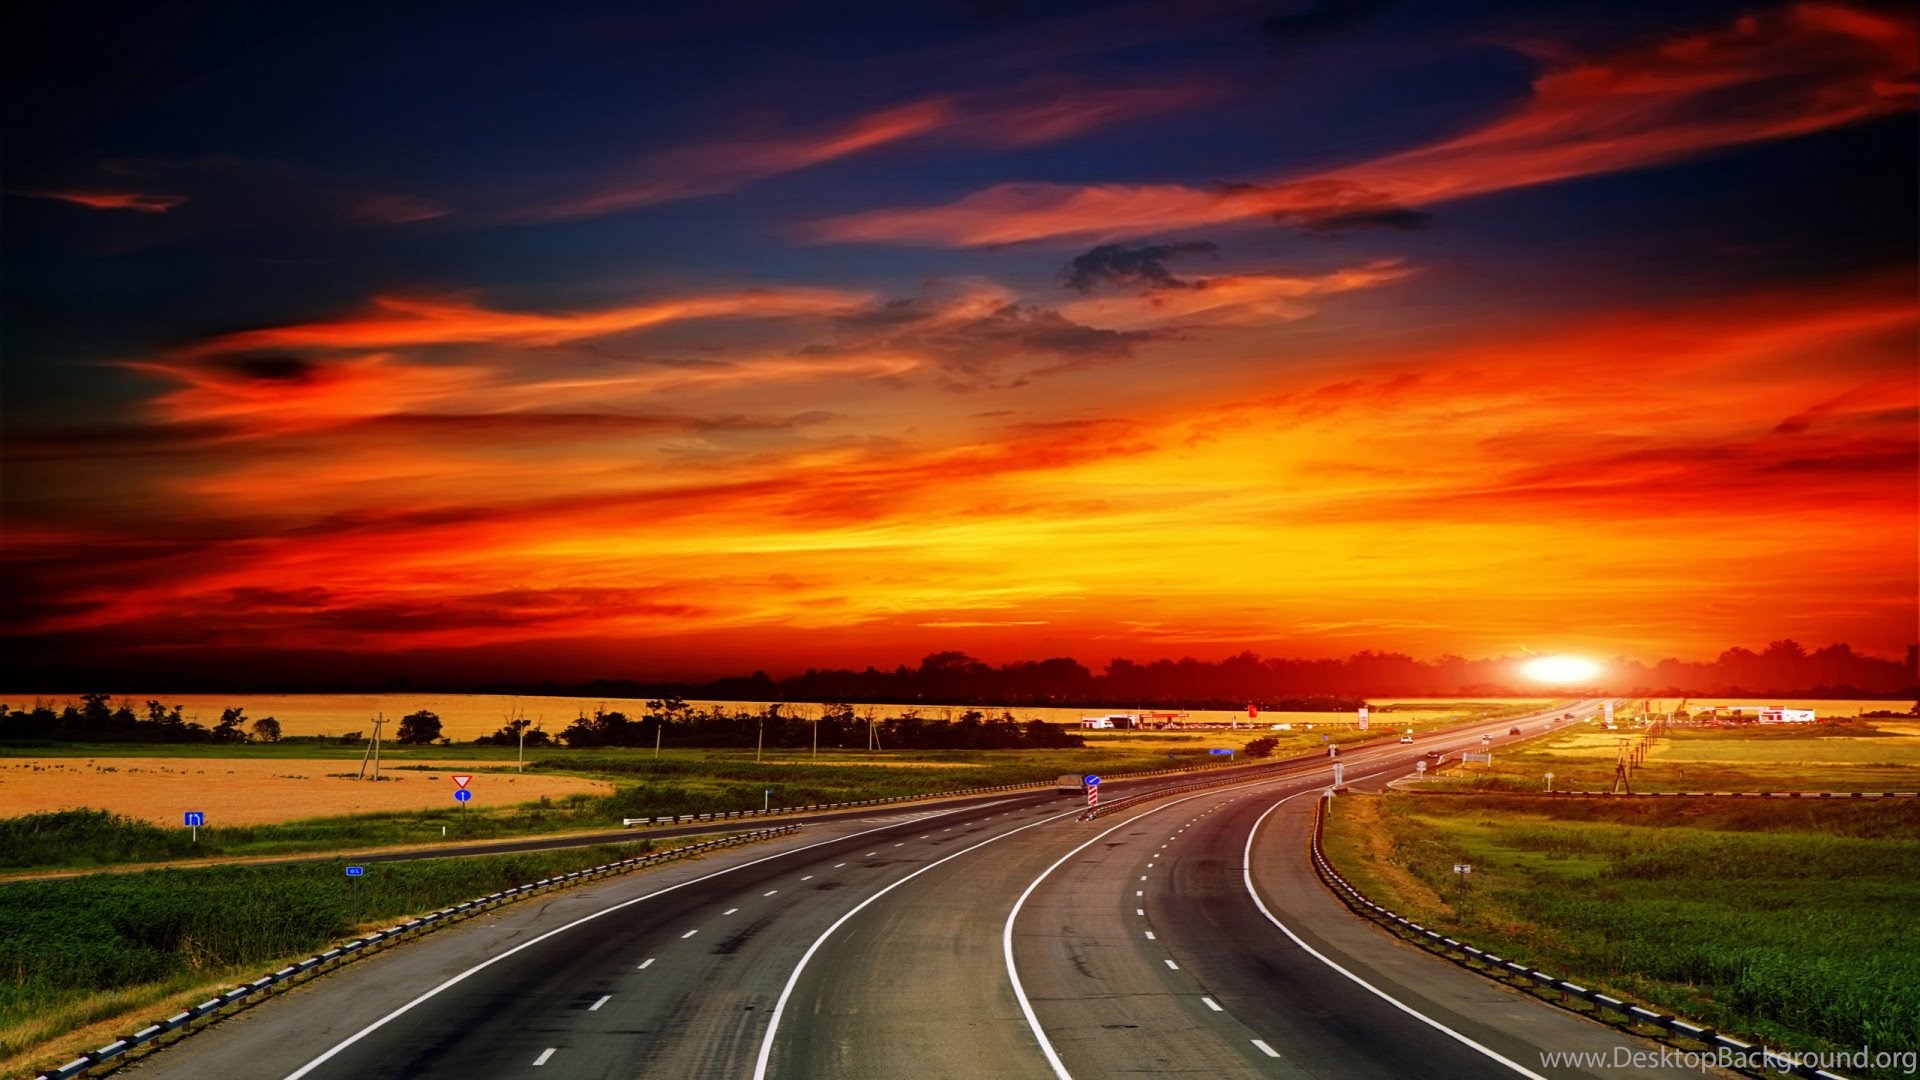 Sunset Highway, Road, 1920x1080 HD Wallpaper And FREE Desktop Background